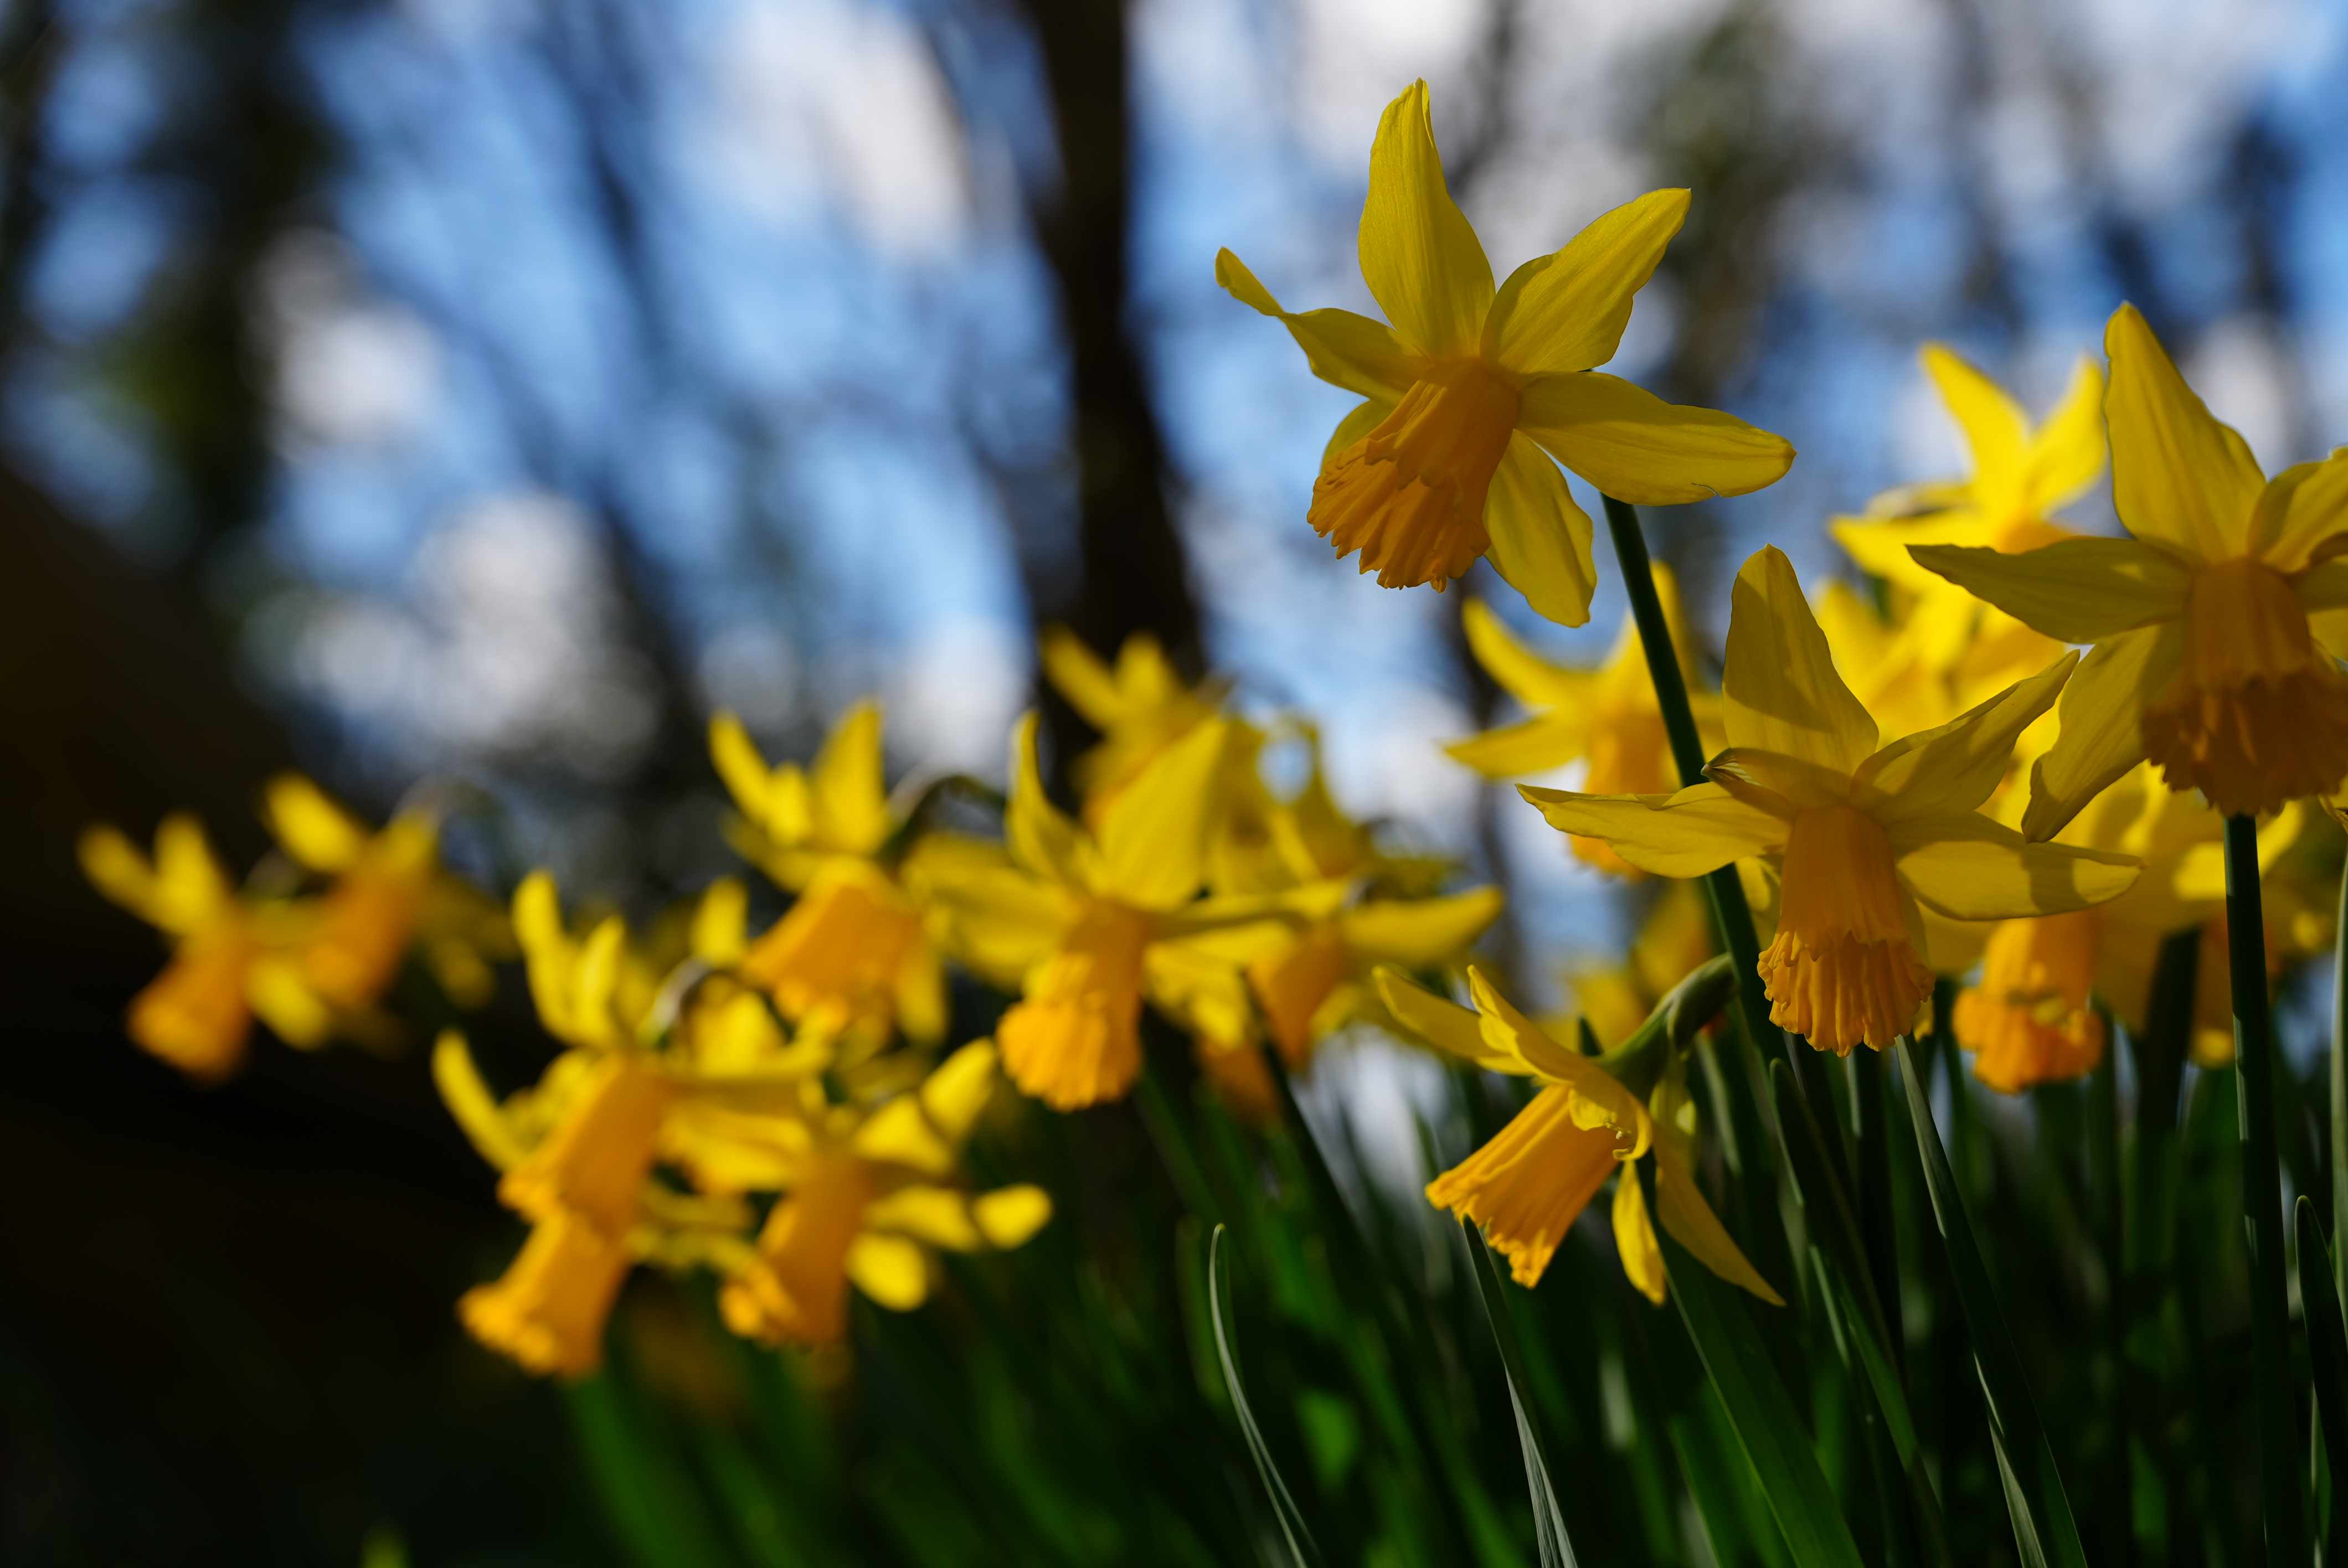 A row of yellow daffodils